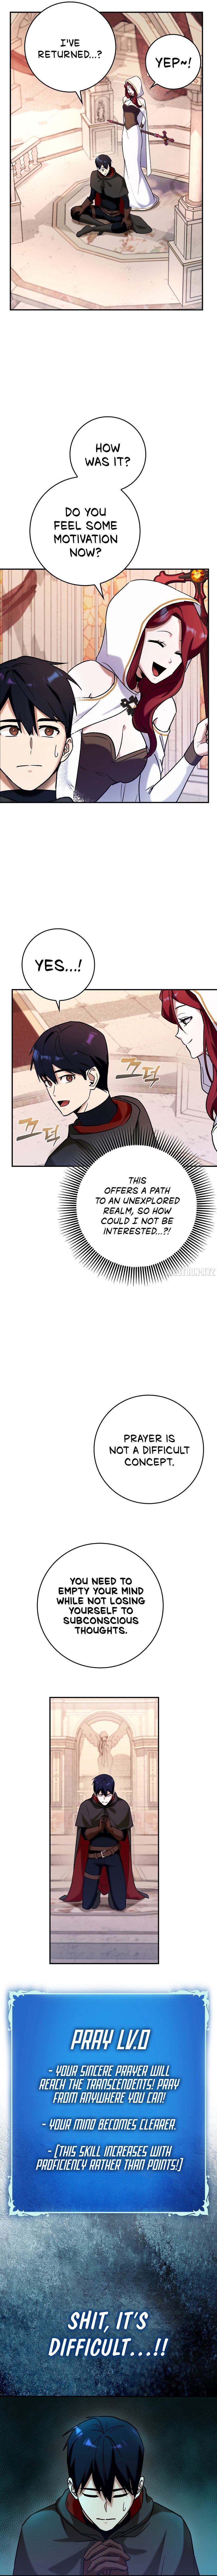 hard-carry-support-chap-20-11